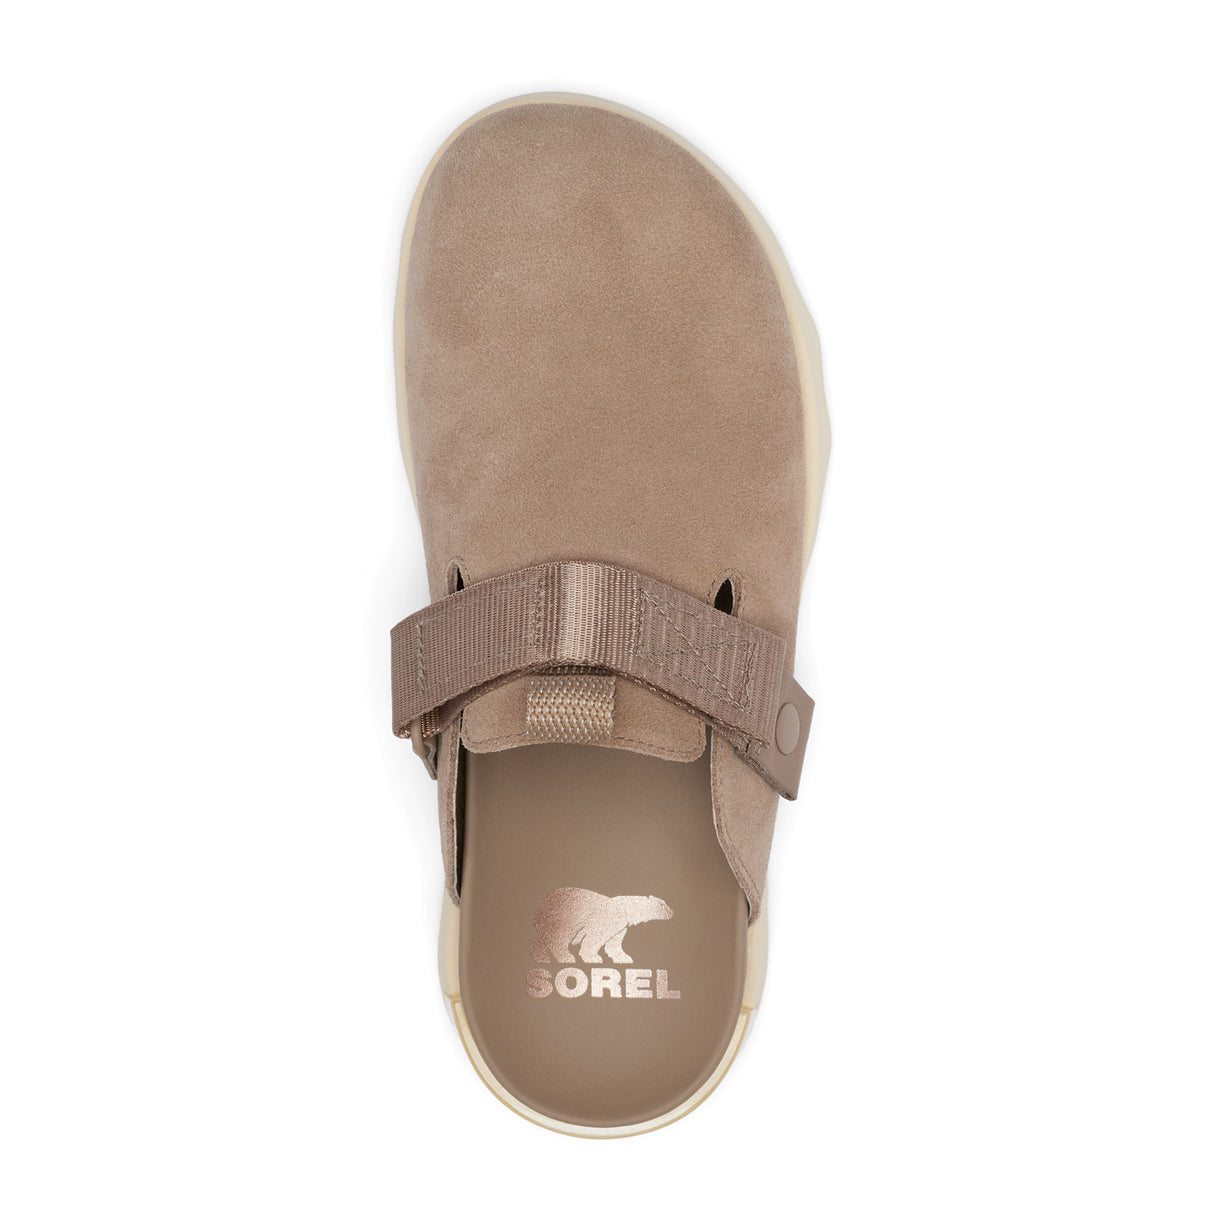 Sorel Viibe Clog (Women) - Omega Taupe/Honey White Dress-Casual - Clogs & Mules - The Heel Shoe Fitters